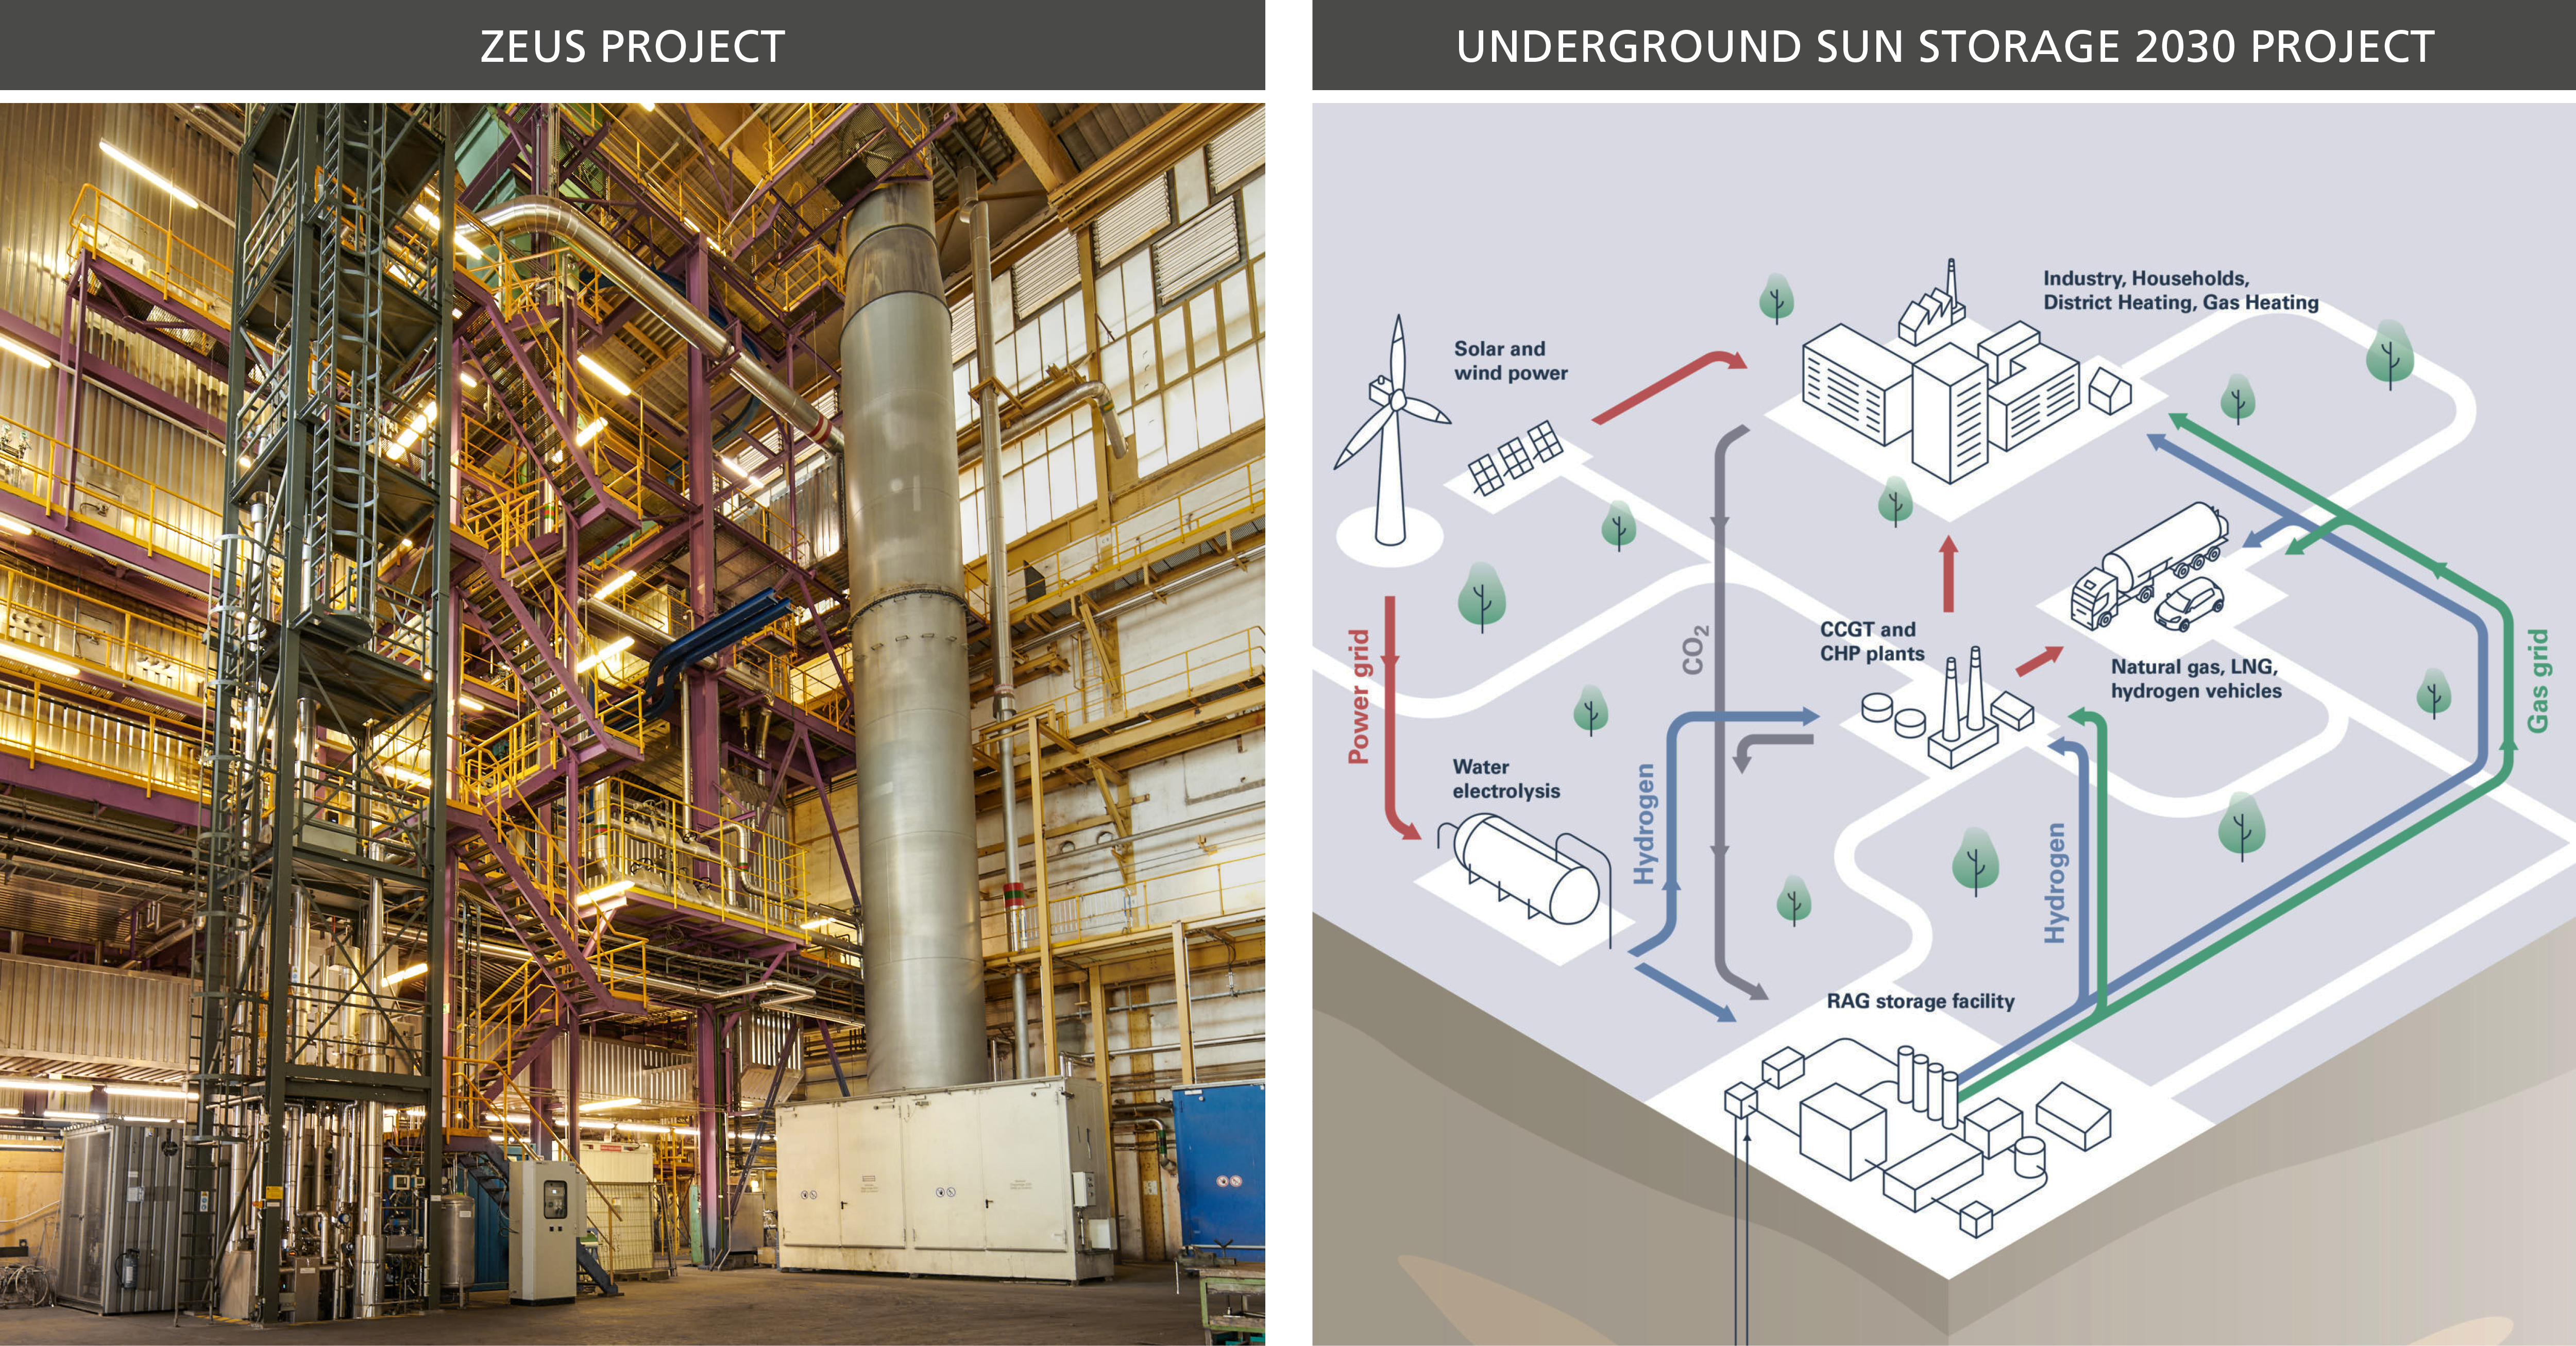 CO2 separator in the ZEUS project, schematic diagram in the USS2030 project (Underground Sun Storage)